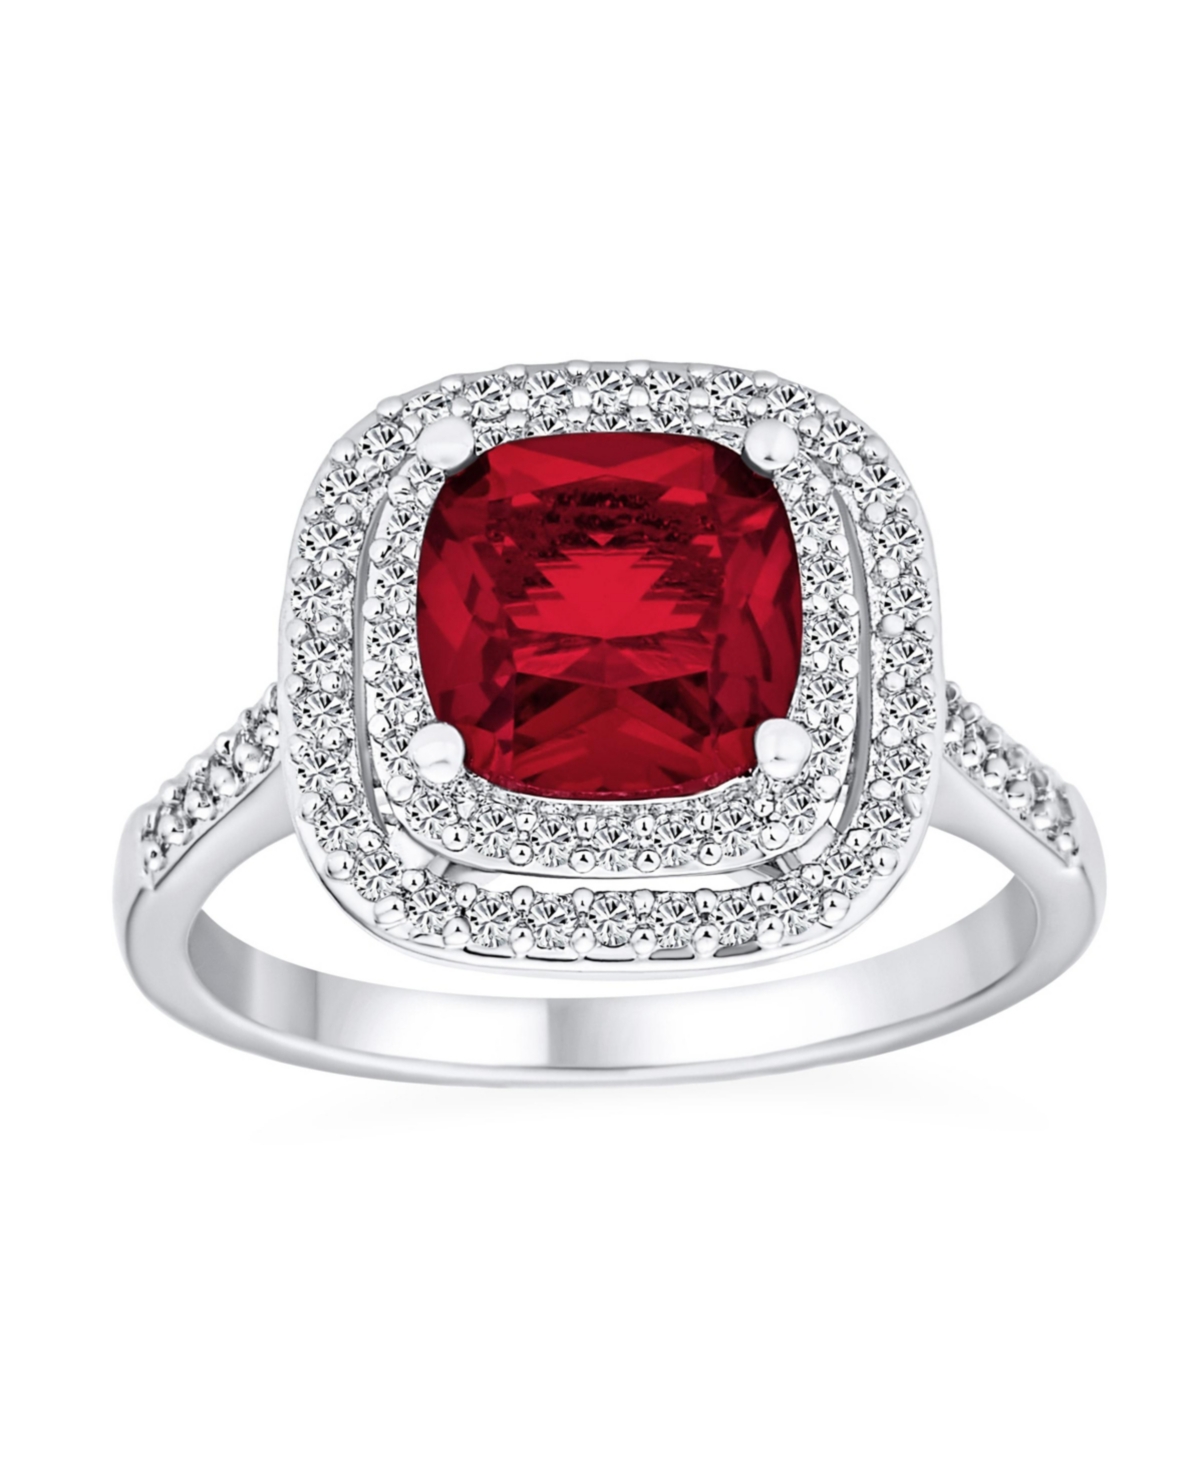 Large Fashion Solitaire Aaa Cubic Zirconia Pave Cz Cushion Cut Simulated Ruby Red Cocktail Statement Ring For Women - Red